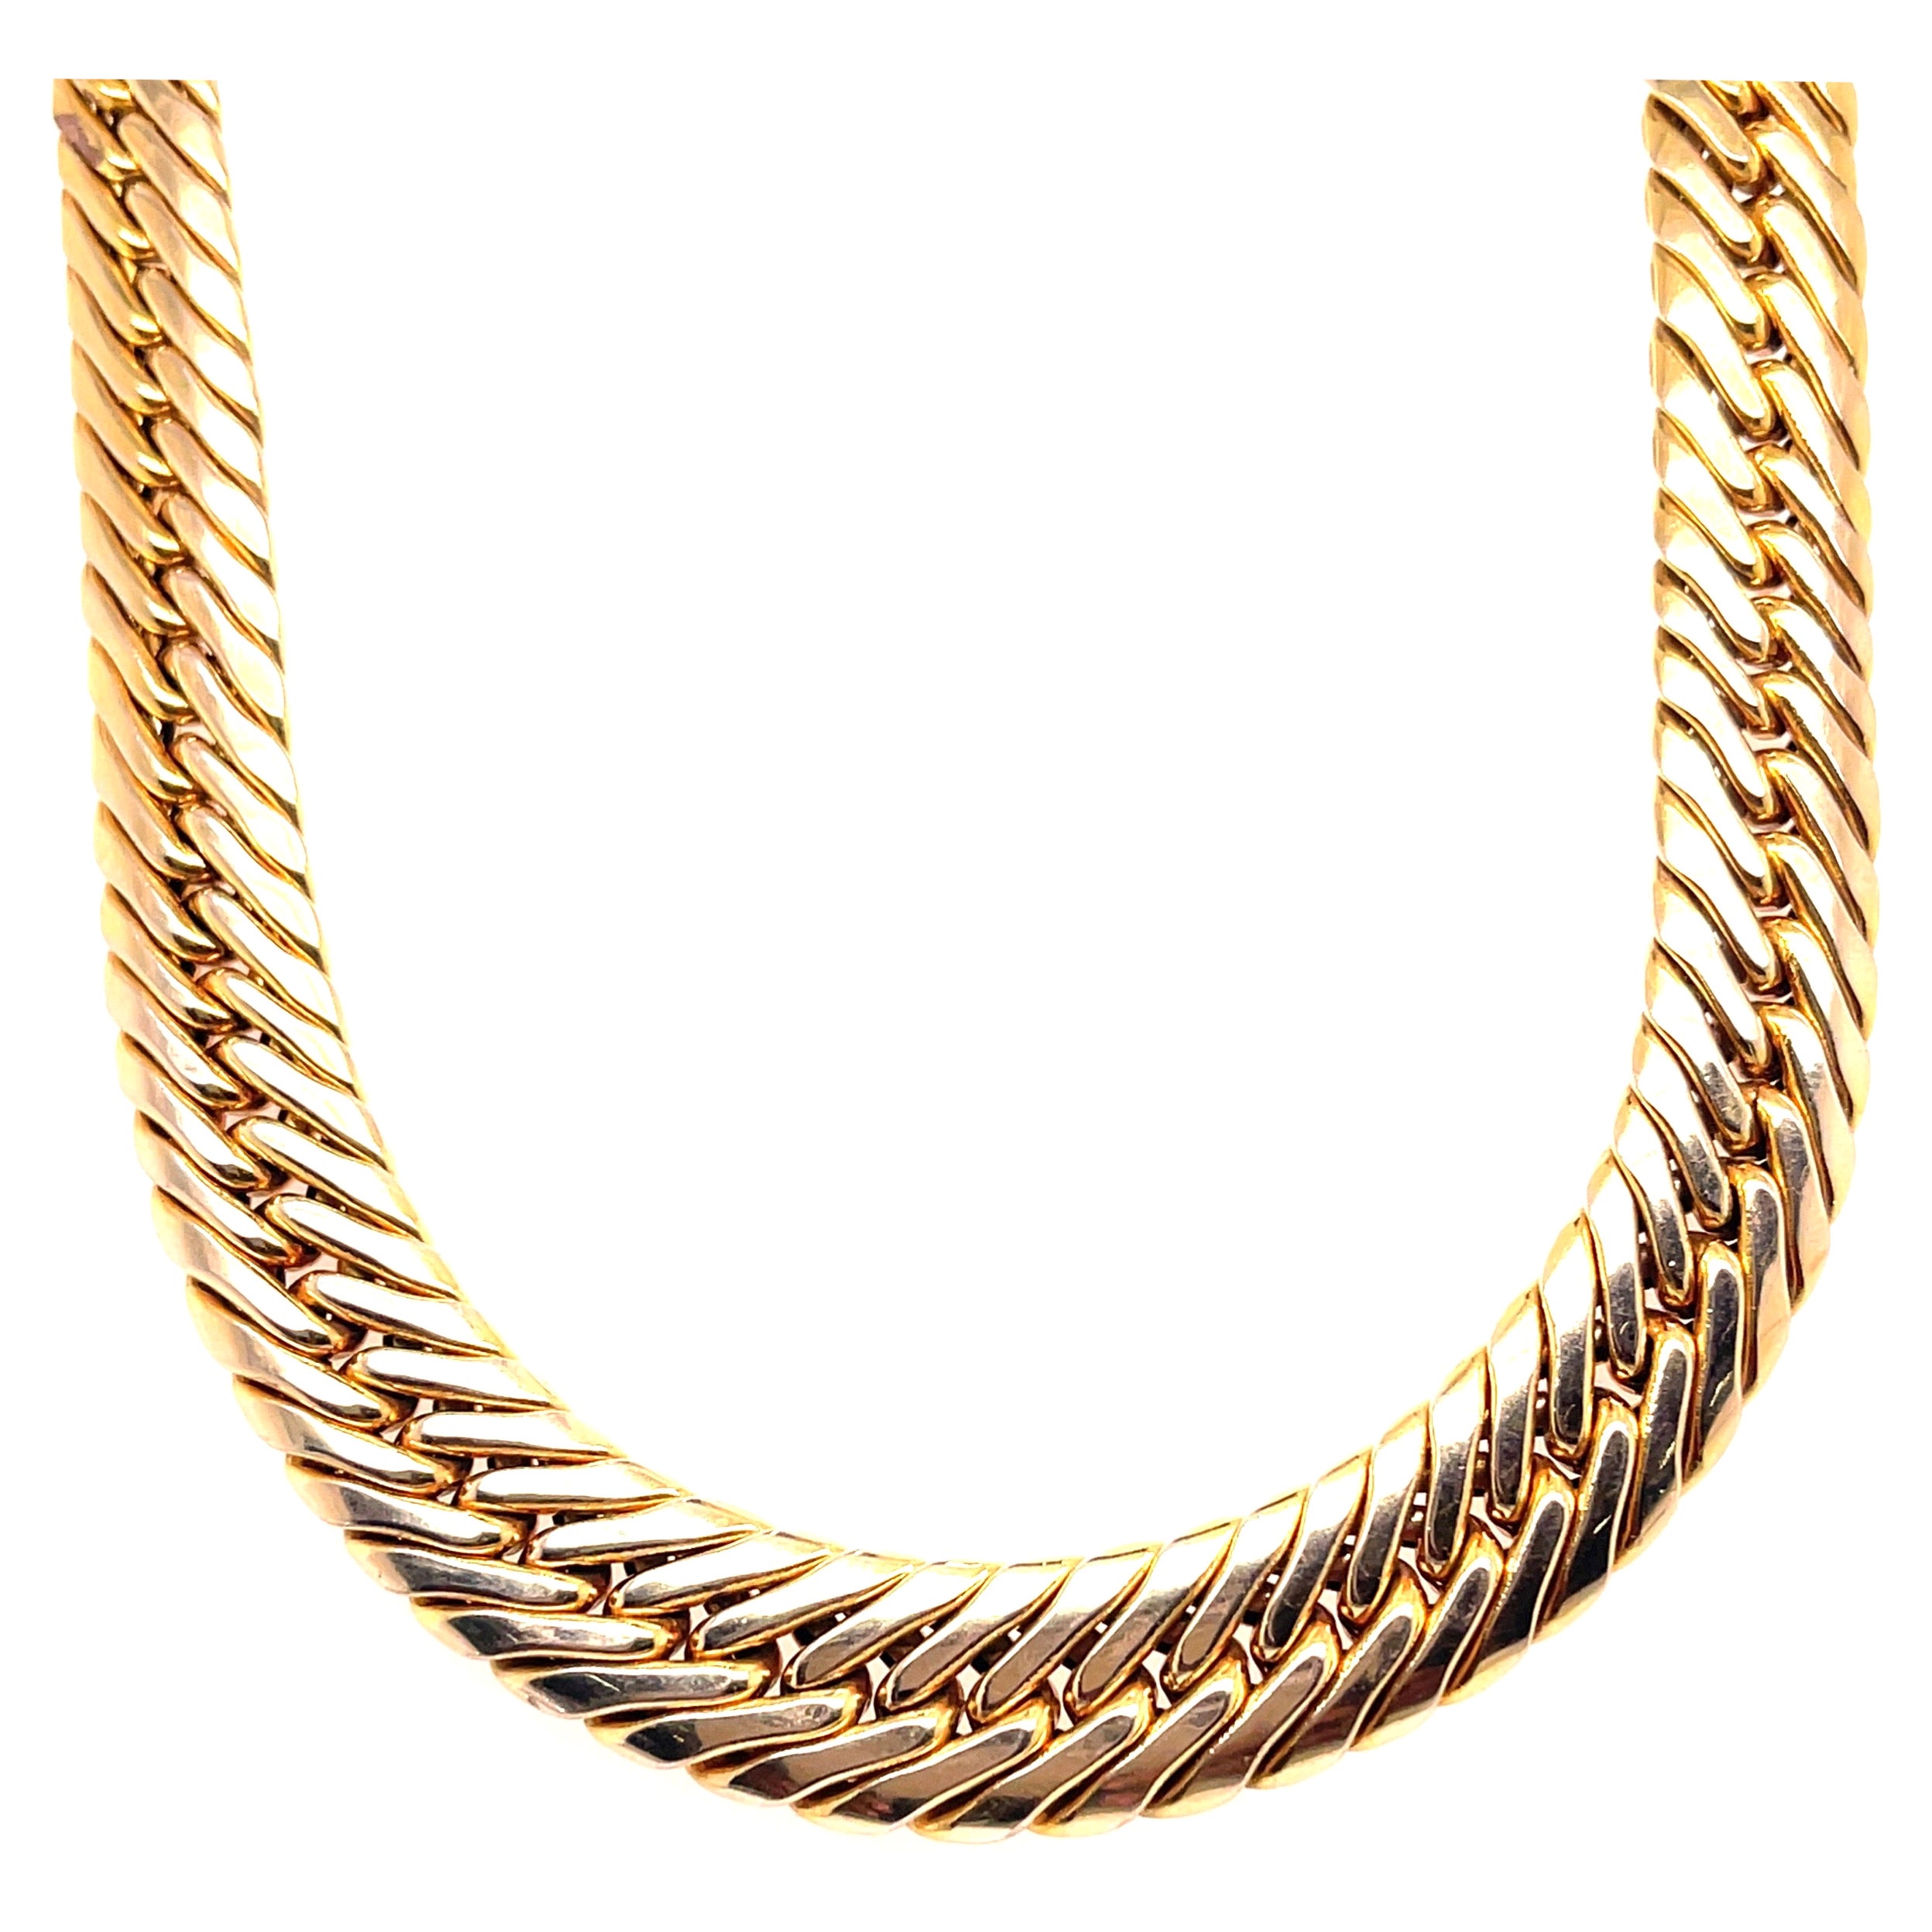 UnoAErre Snake Motif Necklace 14 Karat Yellow Gold 36.1 Grams 16.5 Inches Italy For Sale